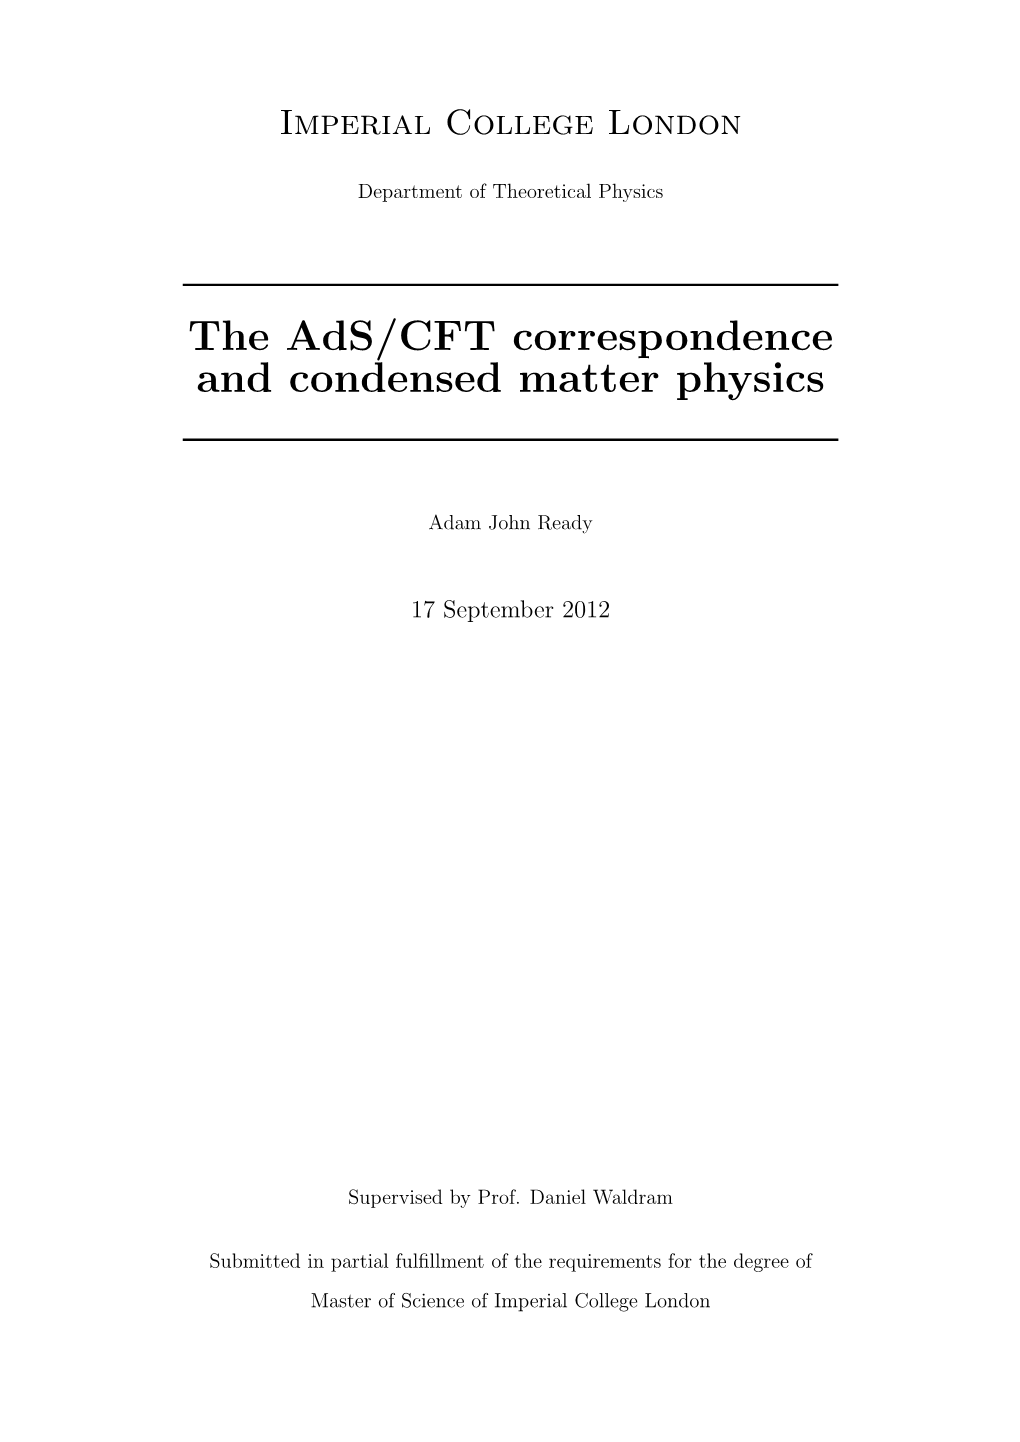 The Ads/CFT Correspondence and Condensed Matter Physics